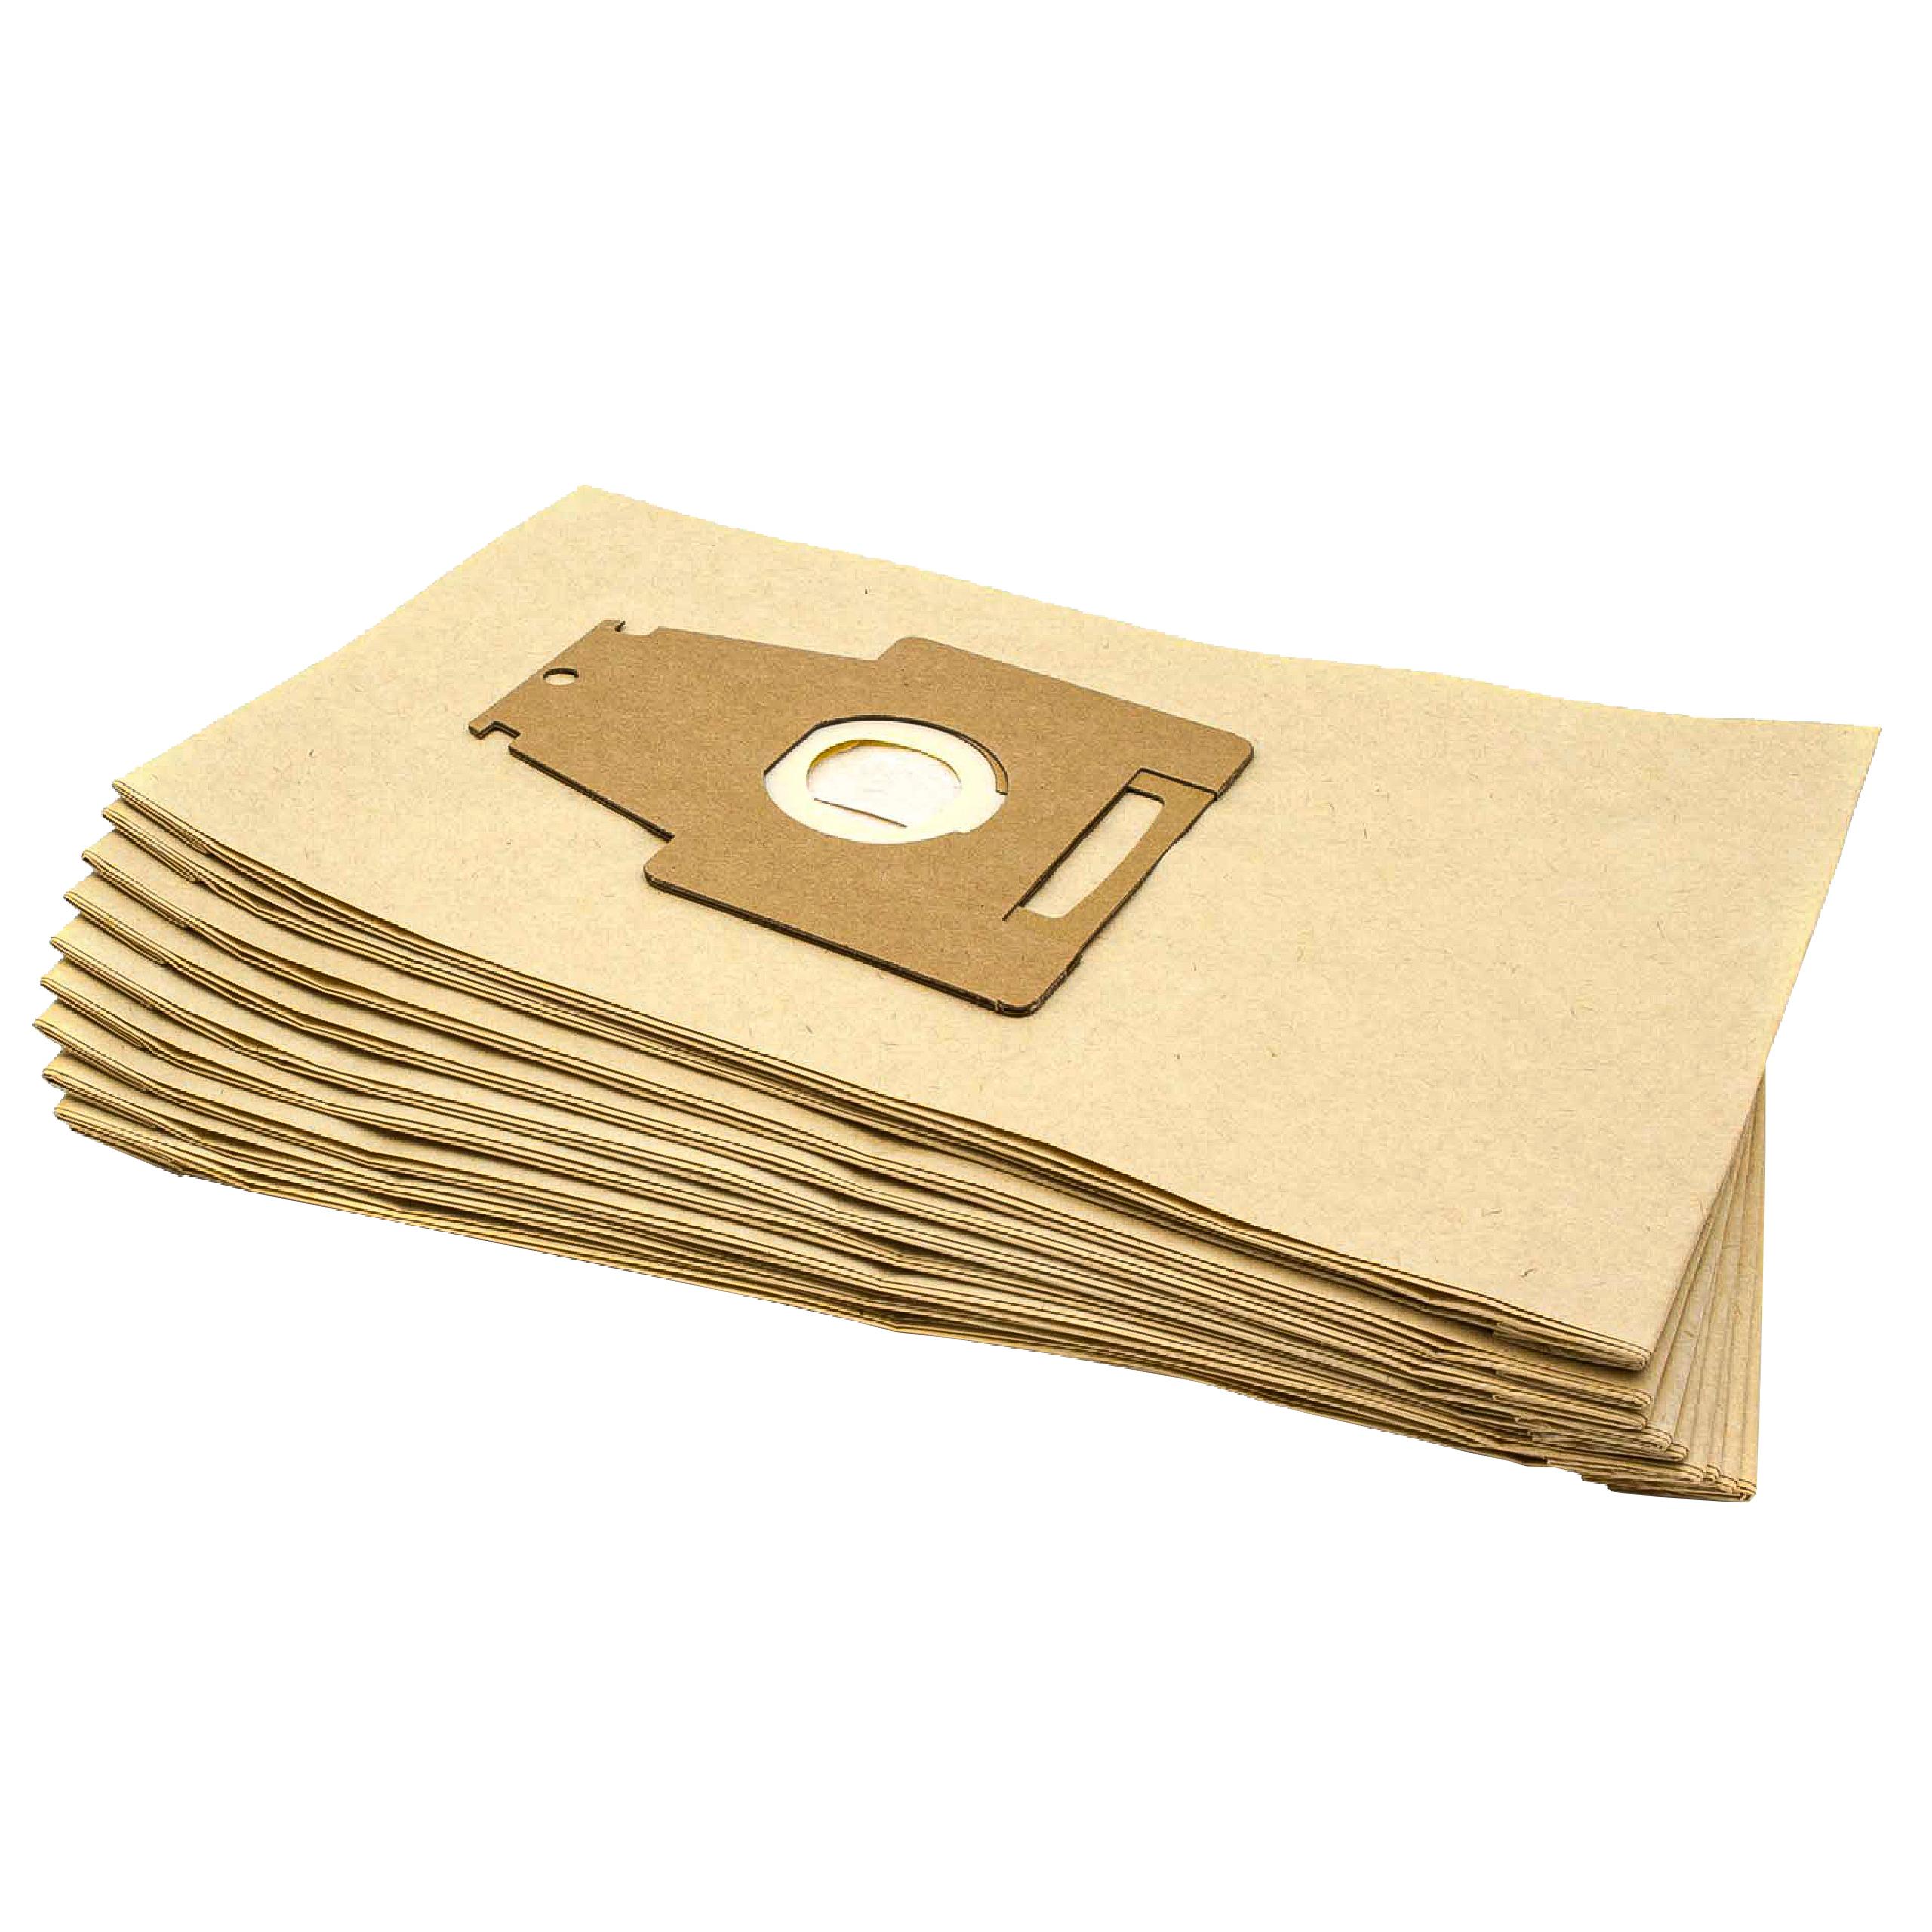 10x Vacuum Cleaner Bag replaces Bosch size P for Bosch - paper